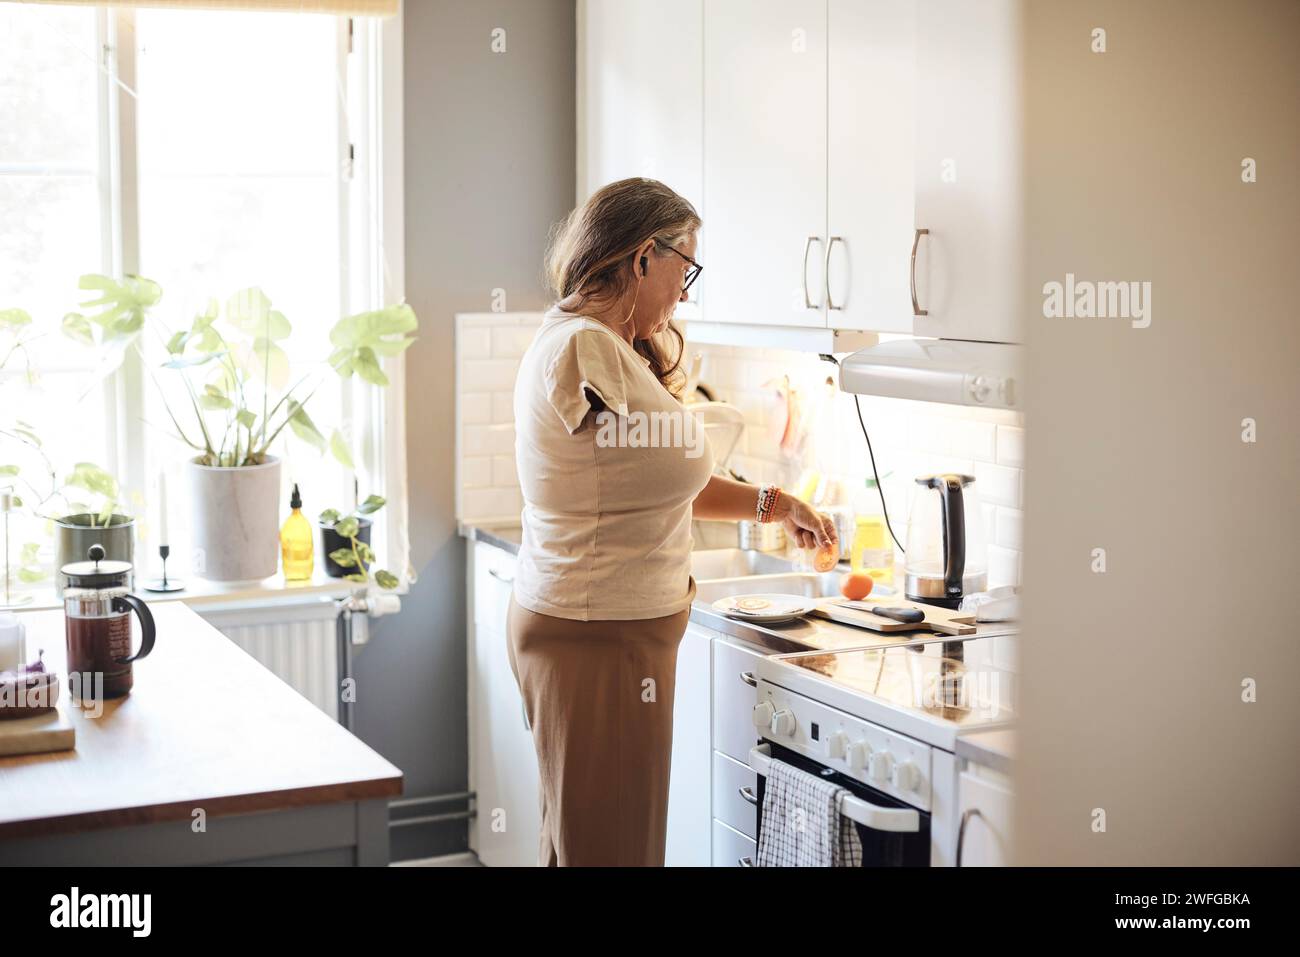 Side view of mature woman with disability preparing breakfast while standing in kitchen at home Stock Photo